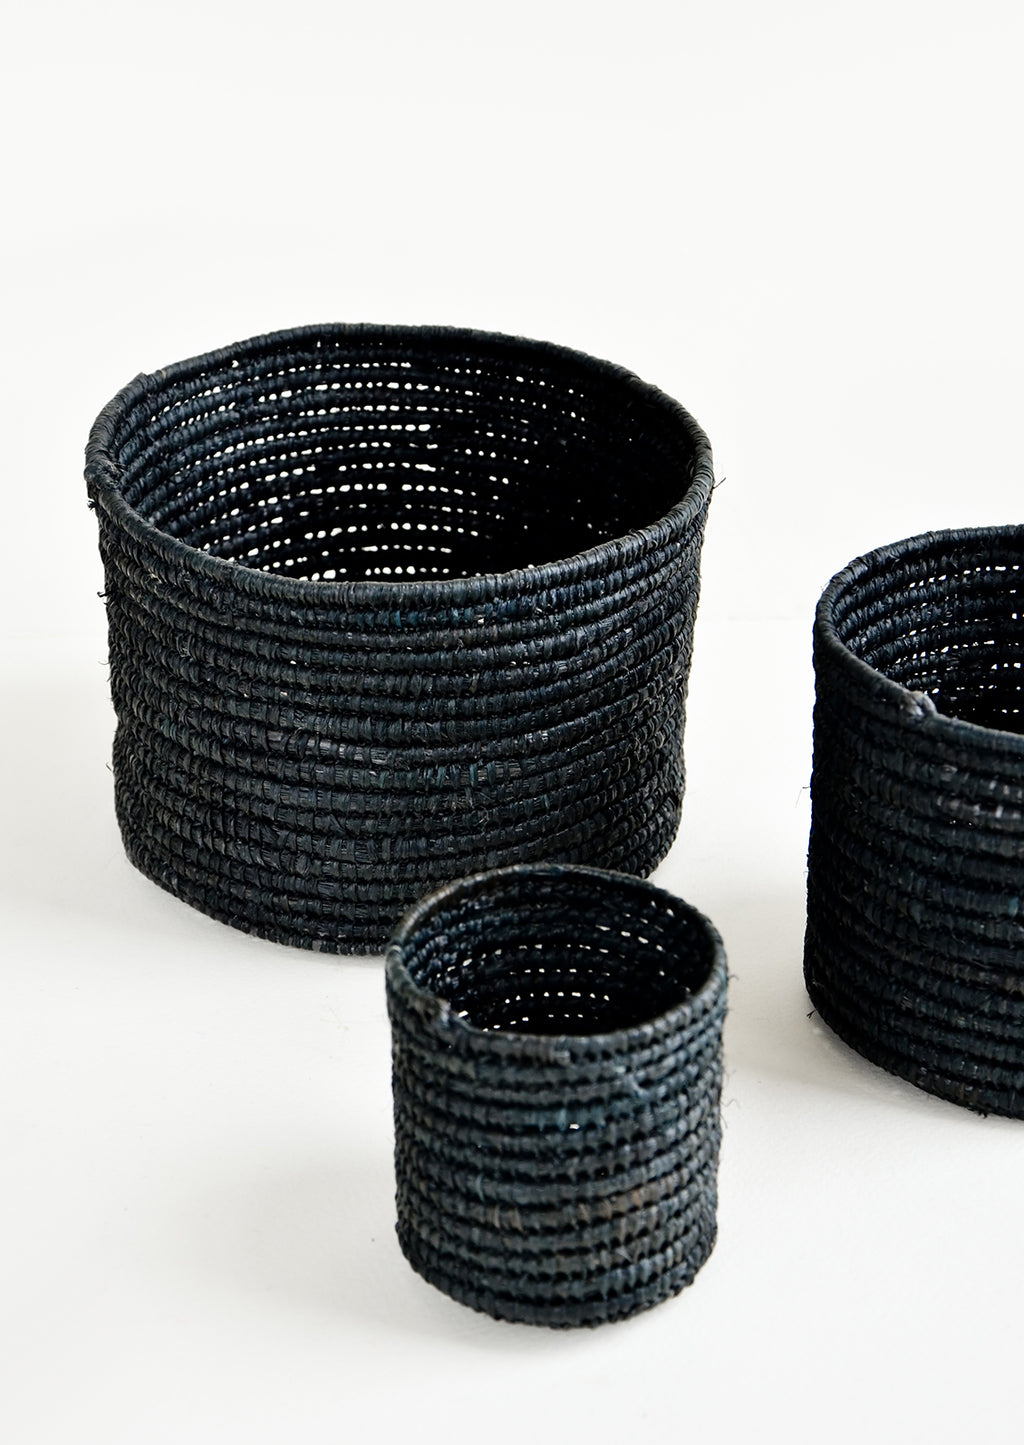 Extra Small / Black: Set of round catchall baskets made black raffia in three incremental sizes.